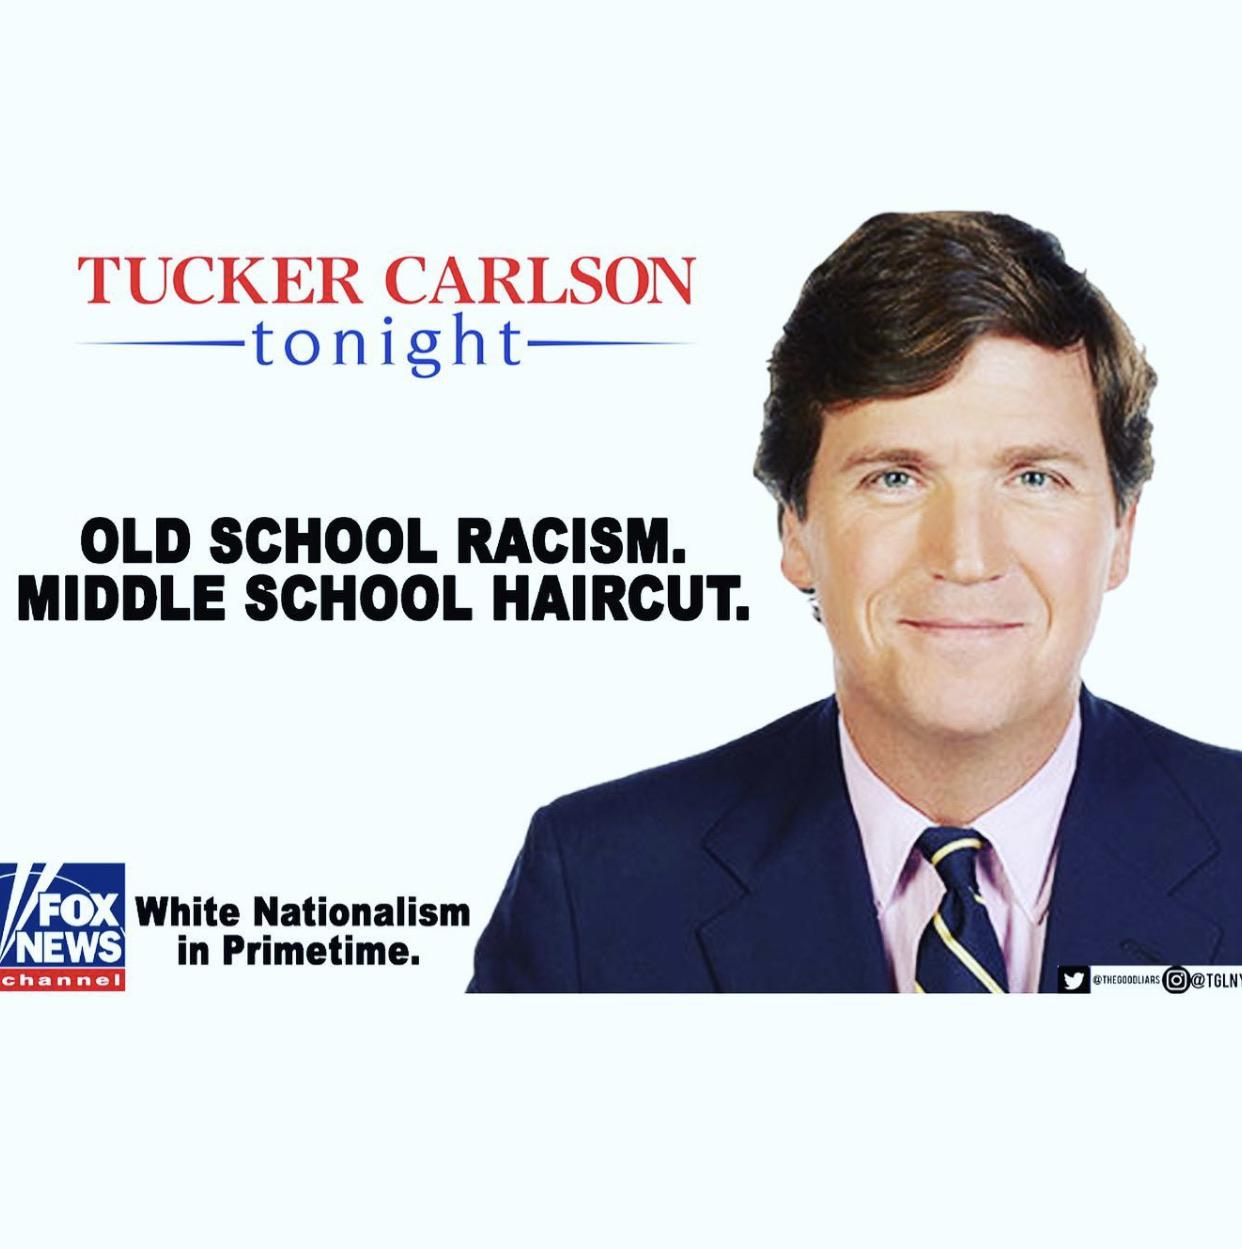 Political, Tucker, MSM, MK Political Memes Political, Tucker, MSM, MK text: TUCKER CARLSON tonight OLD SCHOOL RACISM. MIDDLE SCHOOL HAIRCUT. White Nationalism NEWS in Primetime. gtHEOODOuARs 